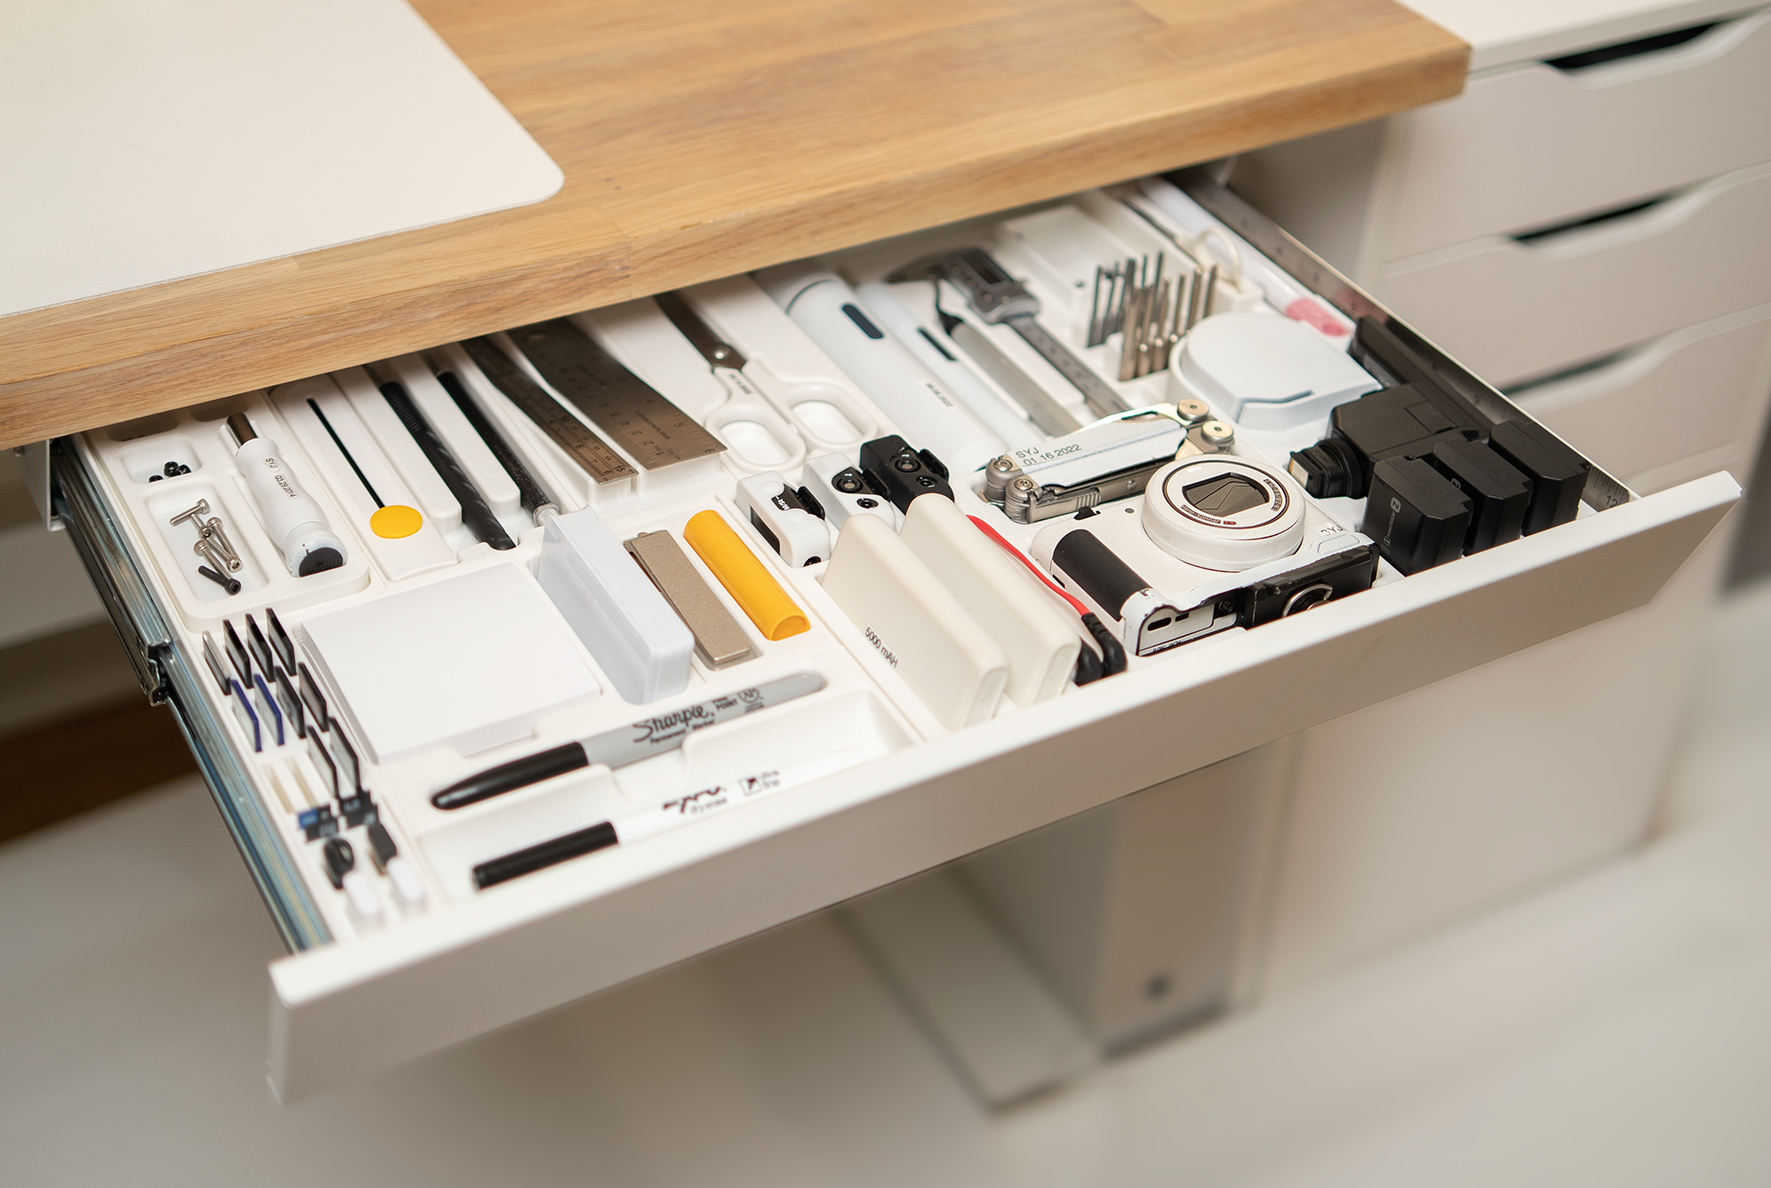 Custom 3D-printed object holders in drawer for pens, cameras, and other tools